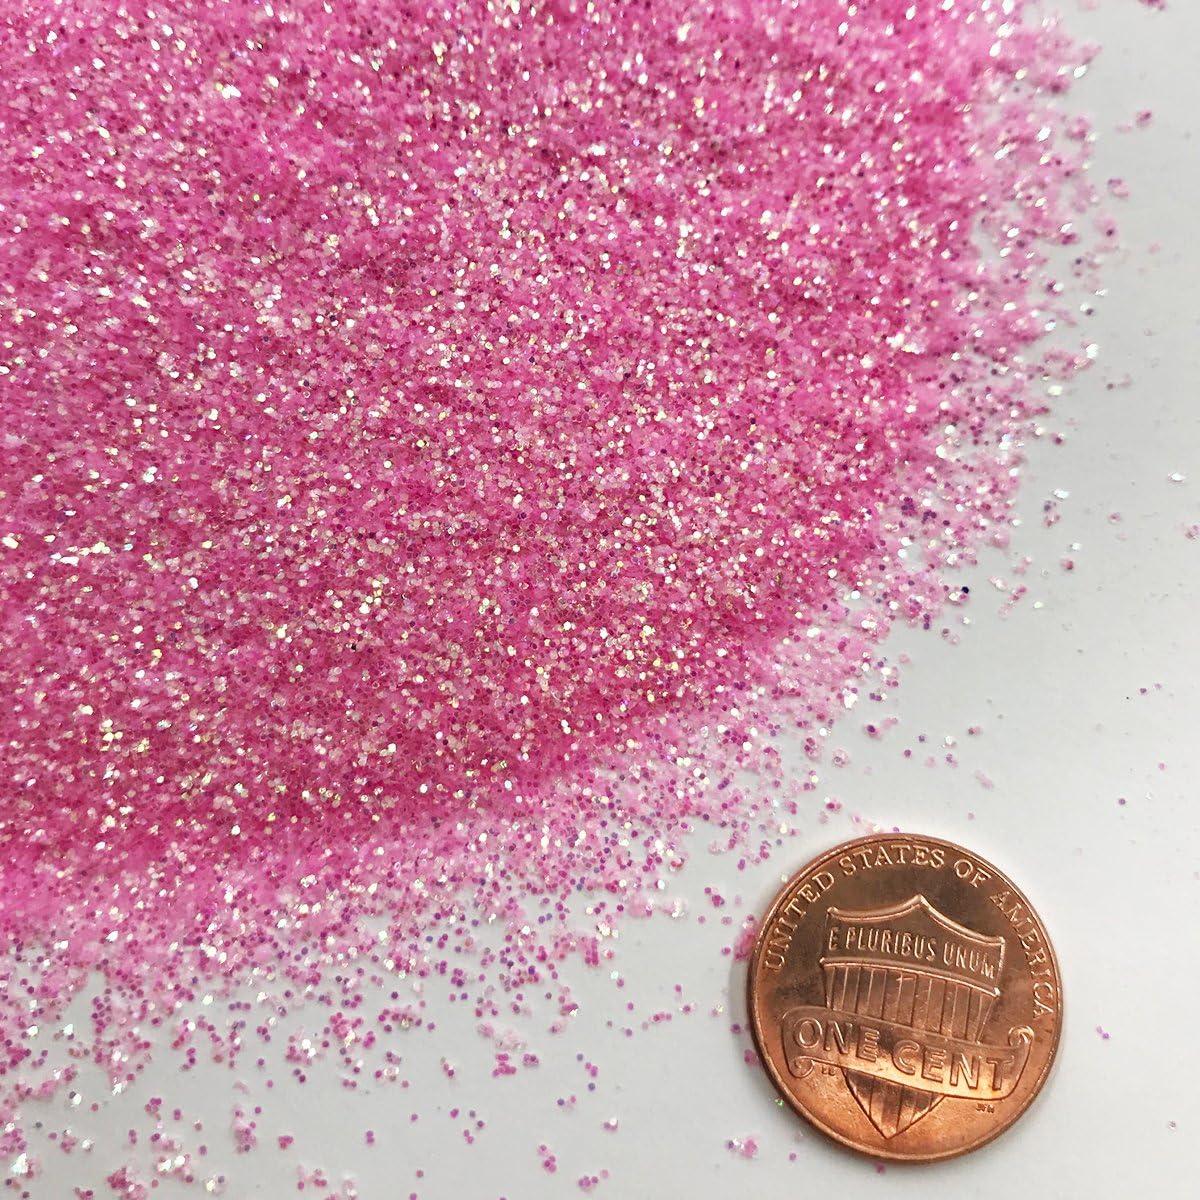 Craft and Party, 1 pound bottled Craft Glitter for Craft and Decoration 